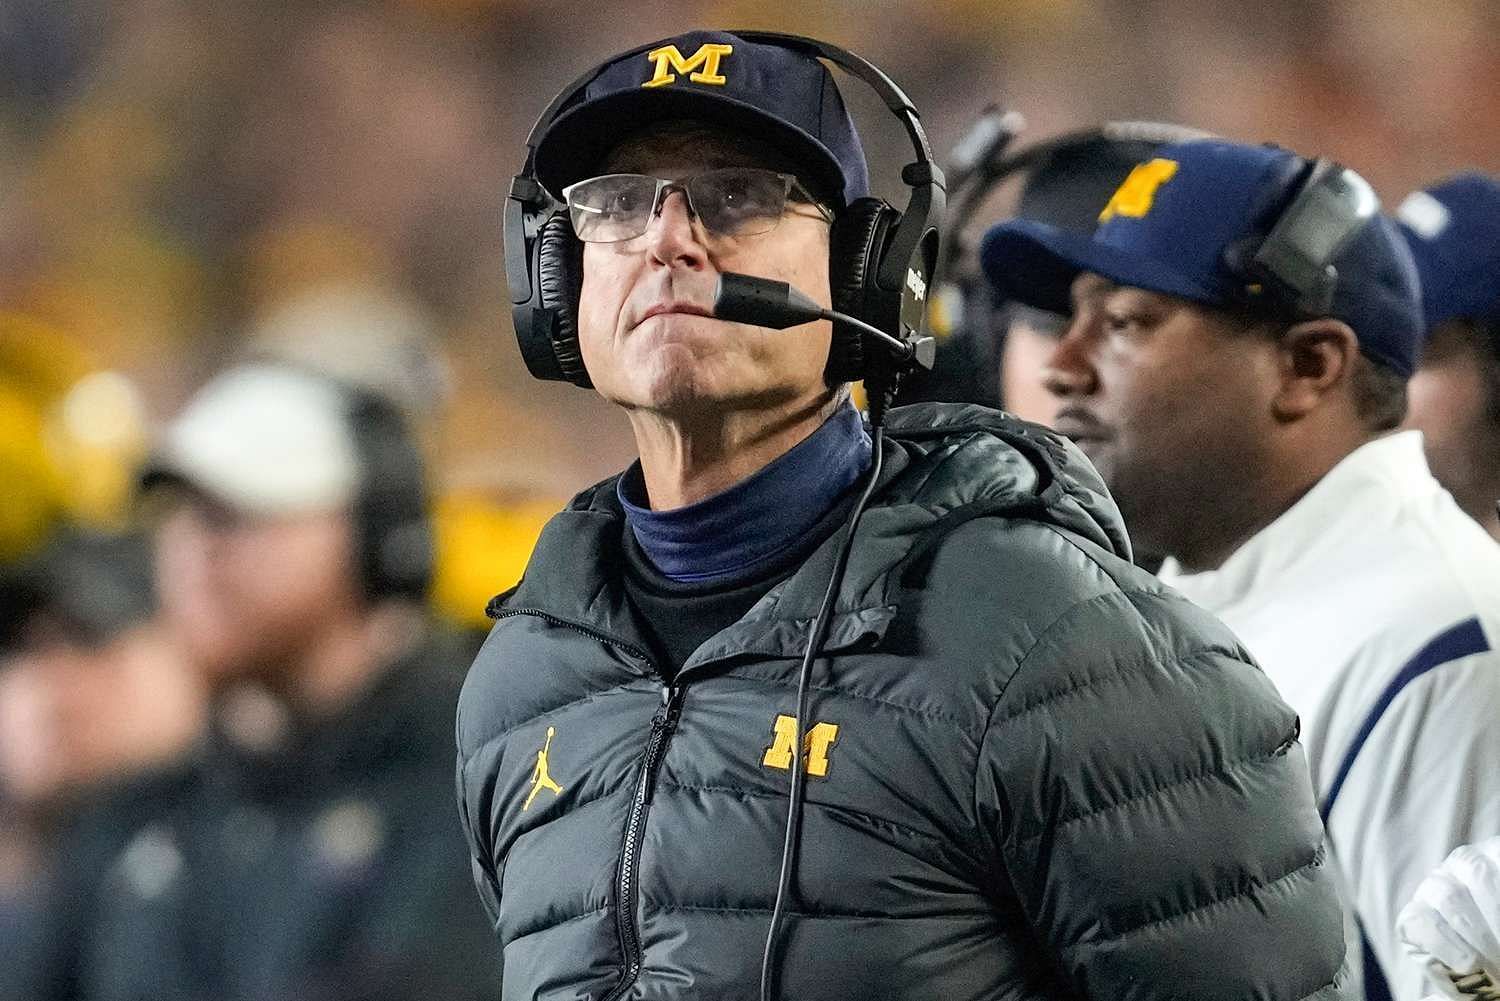 Michigan Wolverines head coach Jim Harbaugh has been suspended for the remainder of the 2023 season